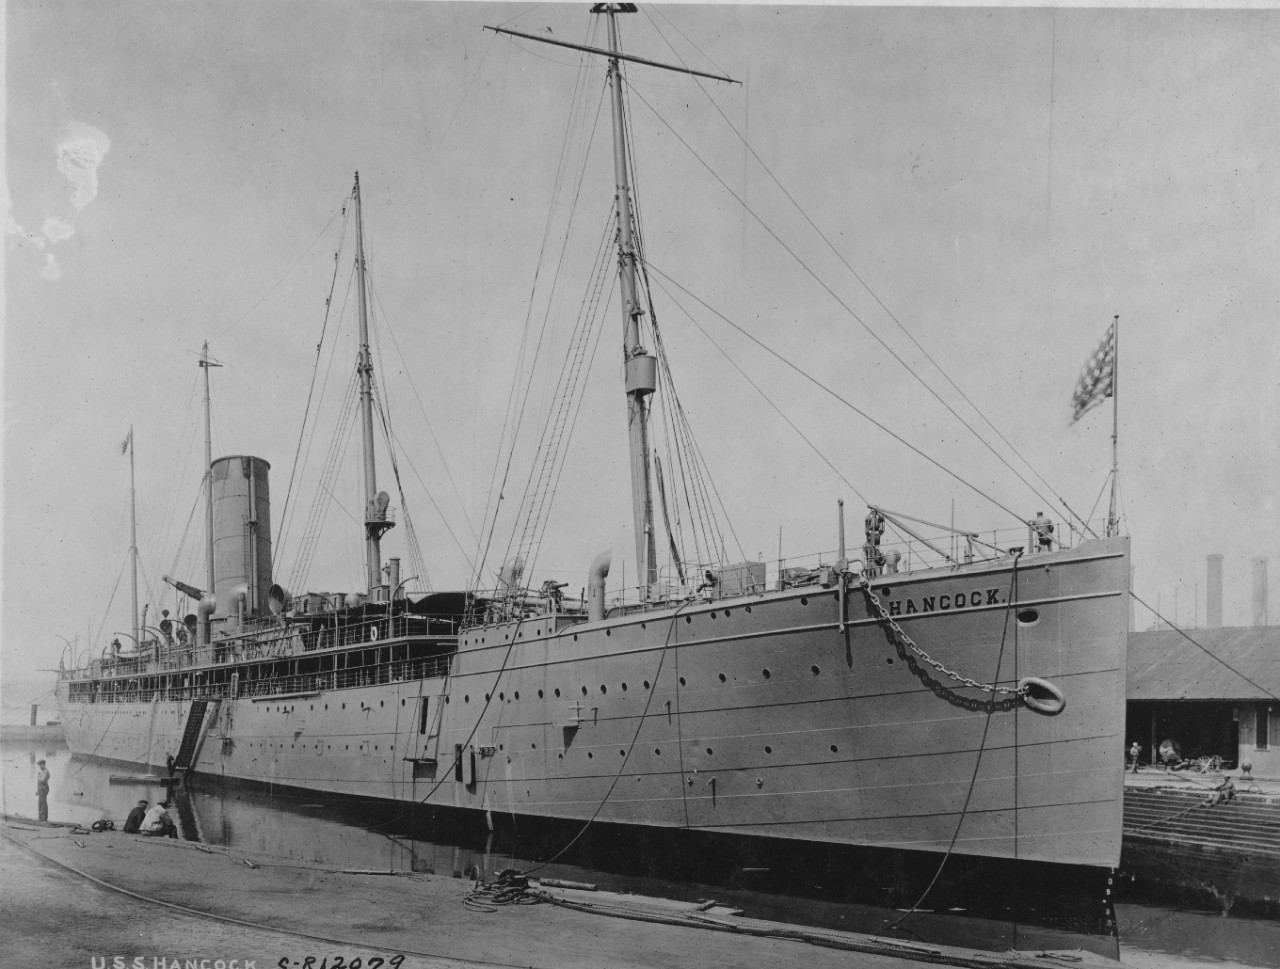 Hancock in port, date unknown, her name clearly visible in raised letters on the starboard bow. (U.S. Navy Bureau of Ships Photograph19-N-12079, National Archives and Records Administration, Still Pictures Division, College Park, Md.)